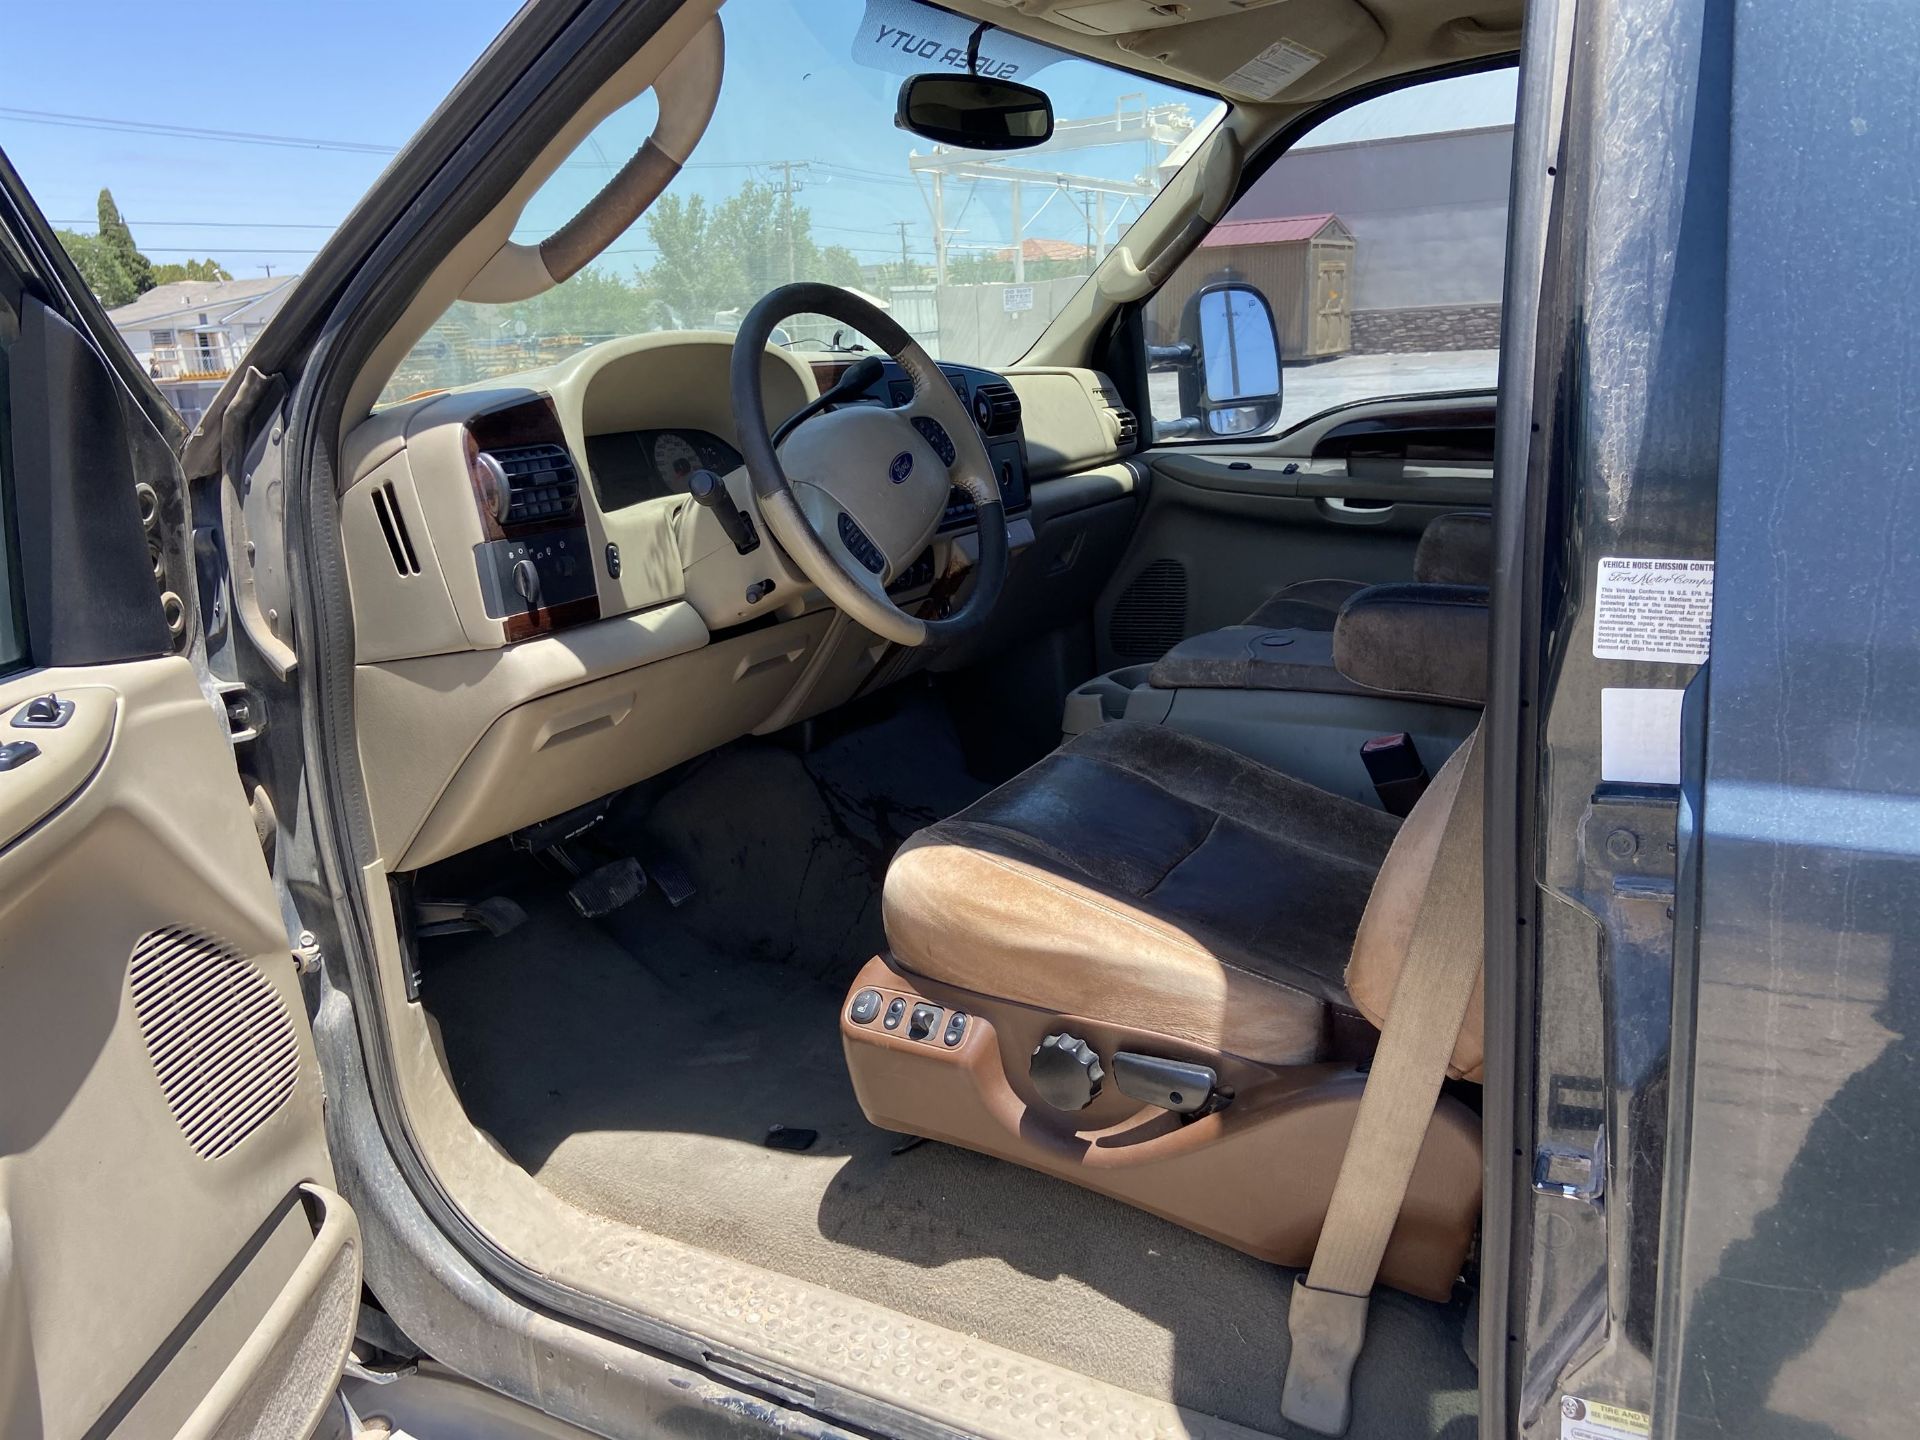 2005 Ford F350 King Ranch SRW 4x4 Crew Cab Long Bed, Leather, 295K Miles, VIN # 1FTWW31P15EC32199 - Image 6 of 17